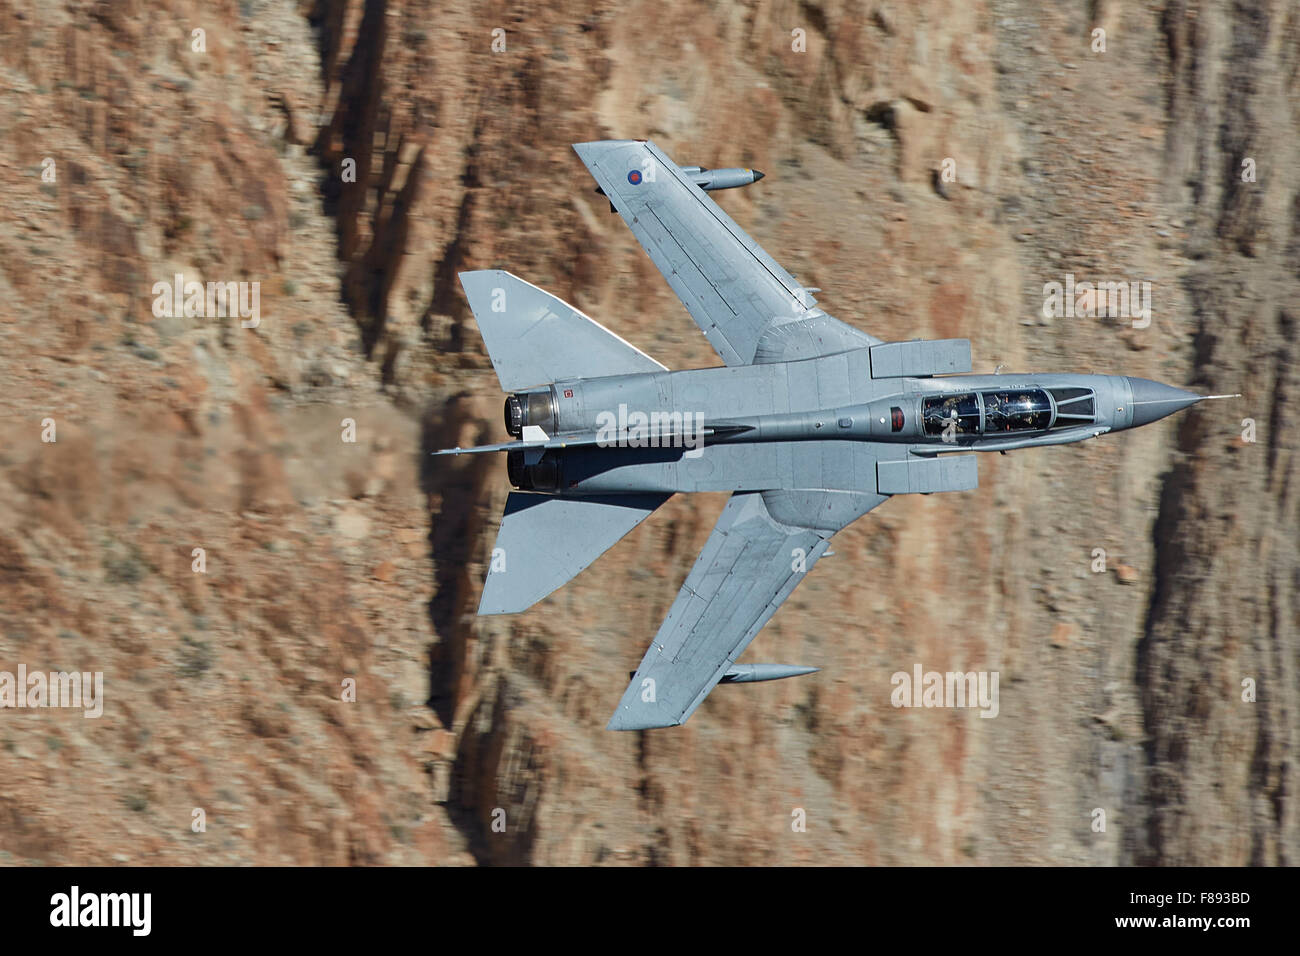 Close Up Shot Of A Royal Air Force Tornado GR4 Jet Fighter Turning Sharply Through A Desert Valley. Stock Photo